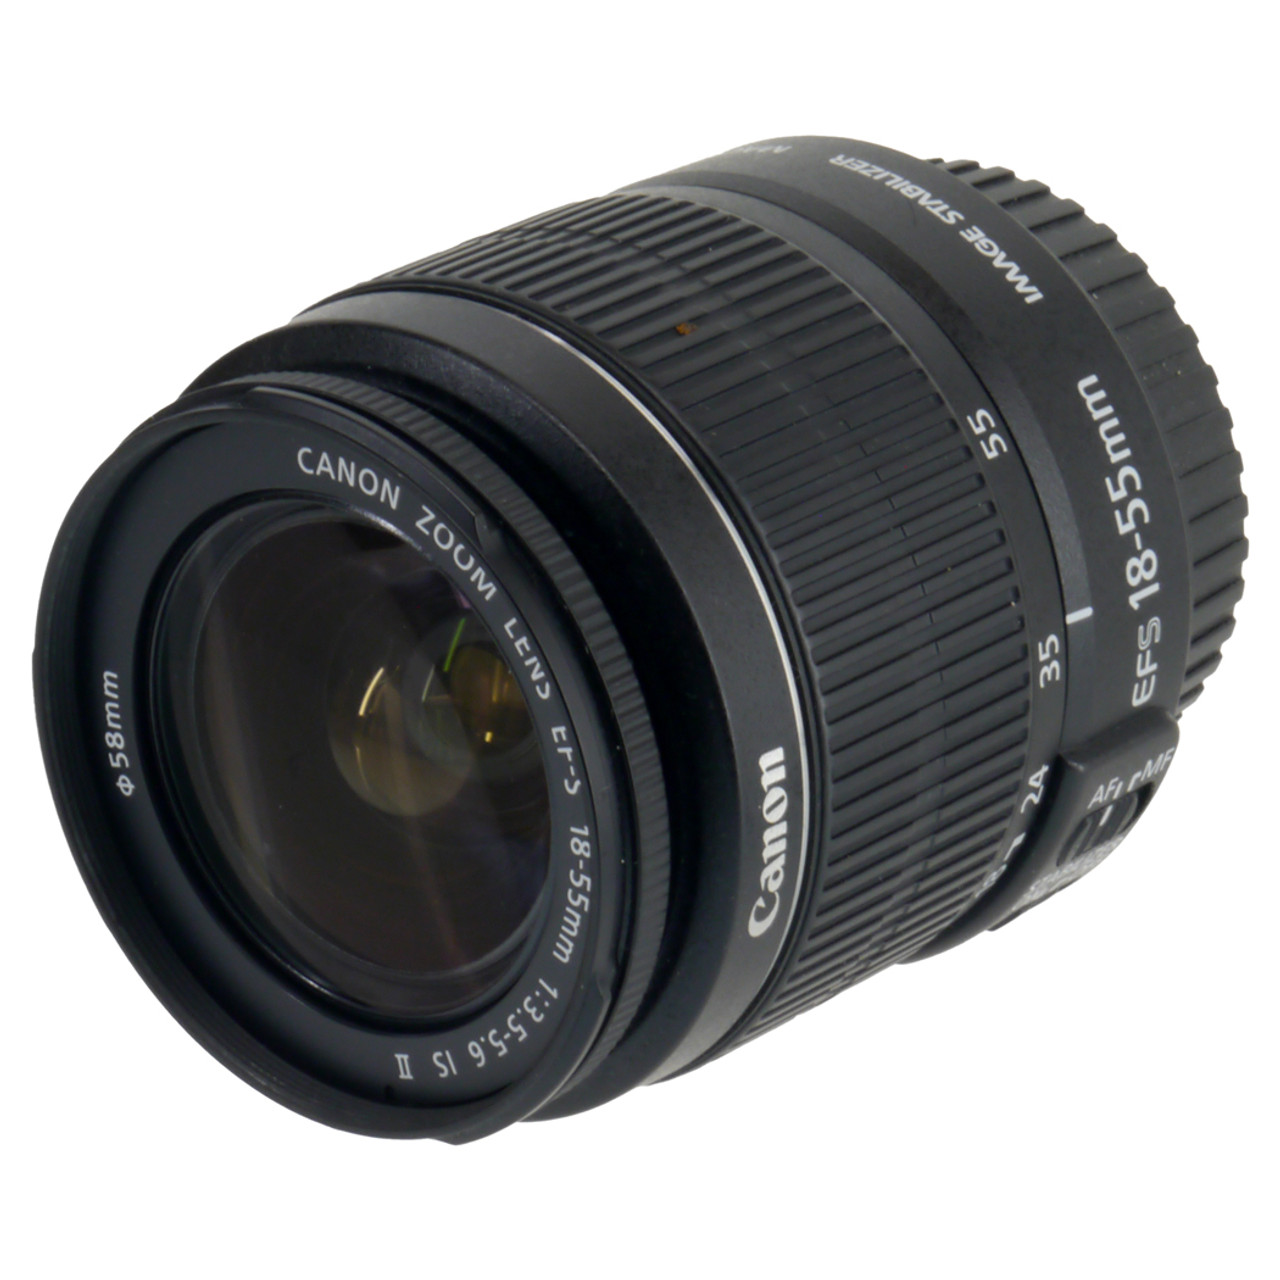 USED CANON EF-S 18-55MM F3.5-5.6 IS II